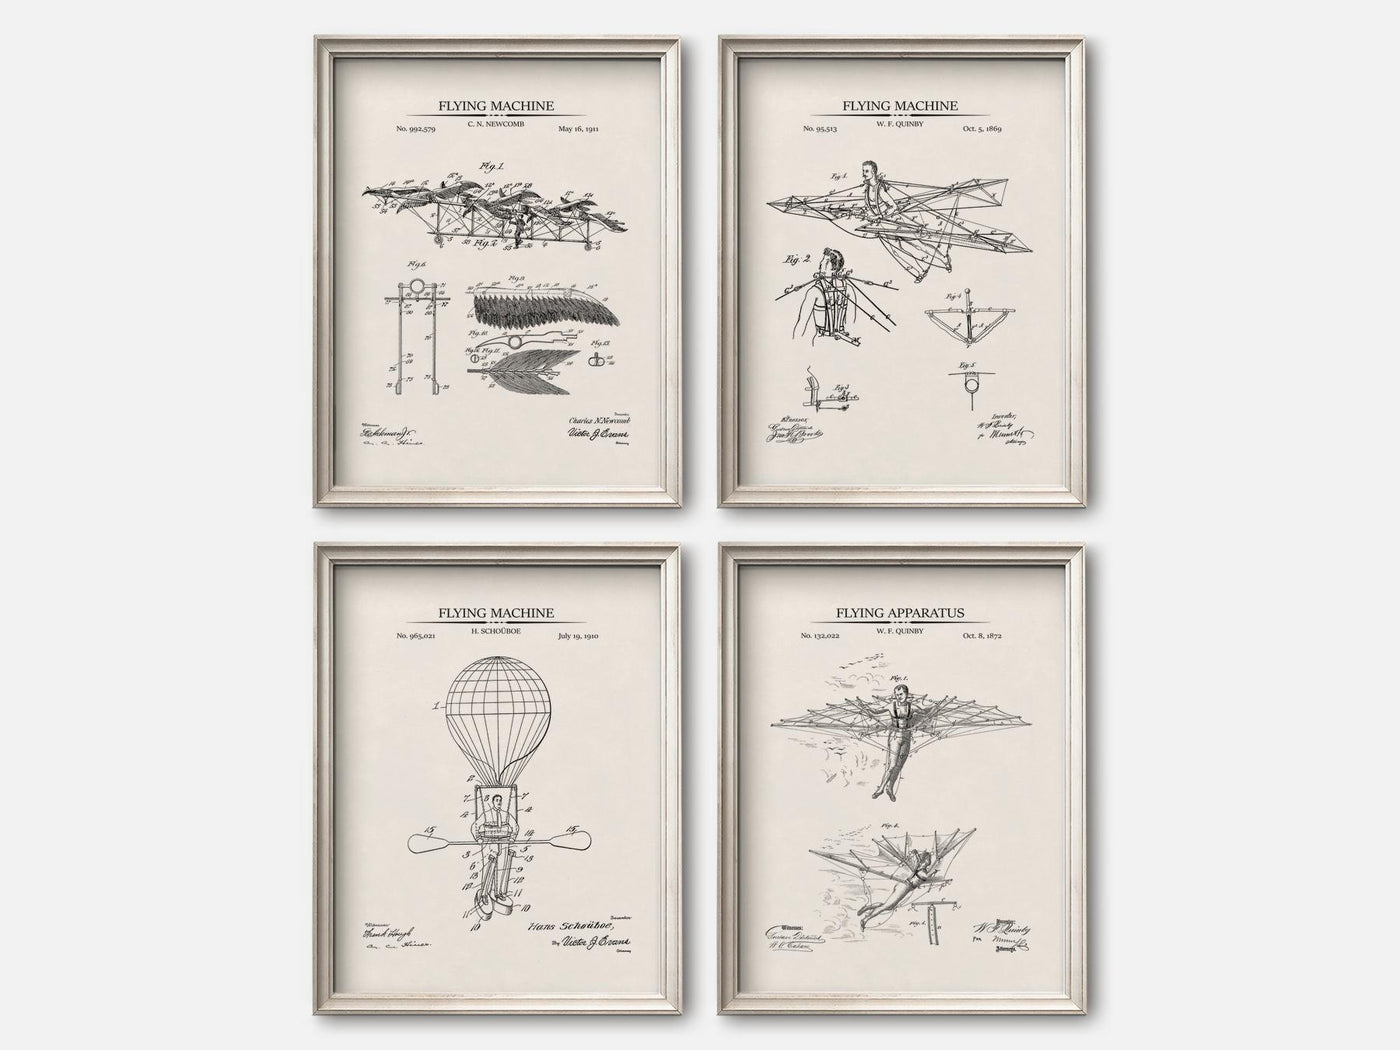 Steampunk Flying Machines Patent Print Set of 4 mockup - A_t10027-V1-PC_F+O-SS_4-PS_5x7-C_ivo variant